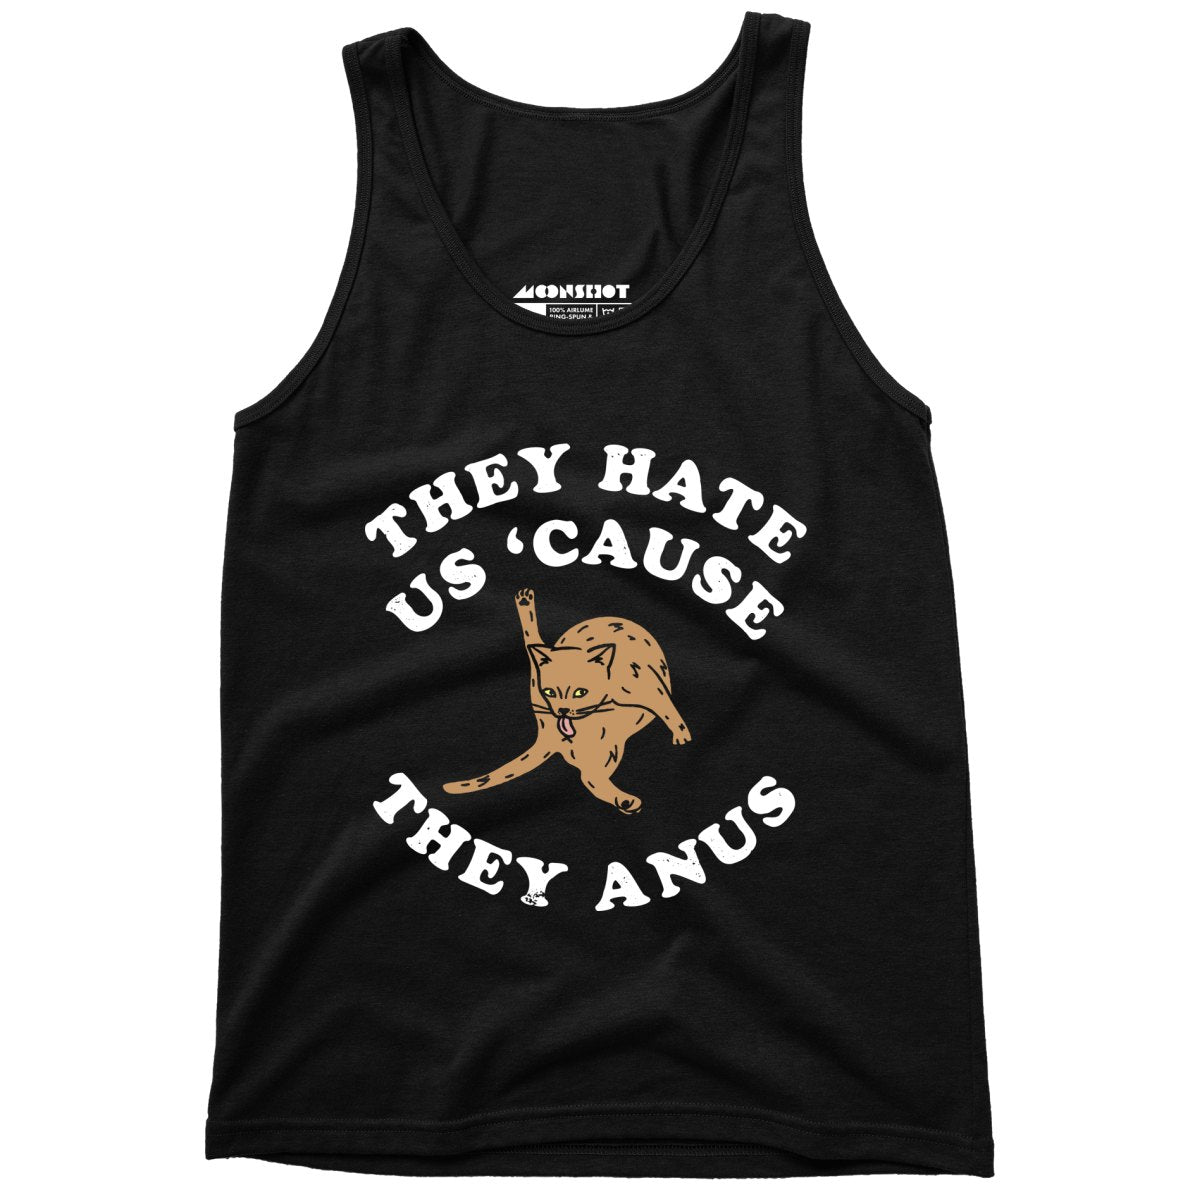 They Hate Us Cause They Anus - Unisex Tank Top